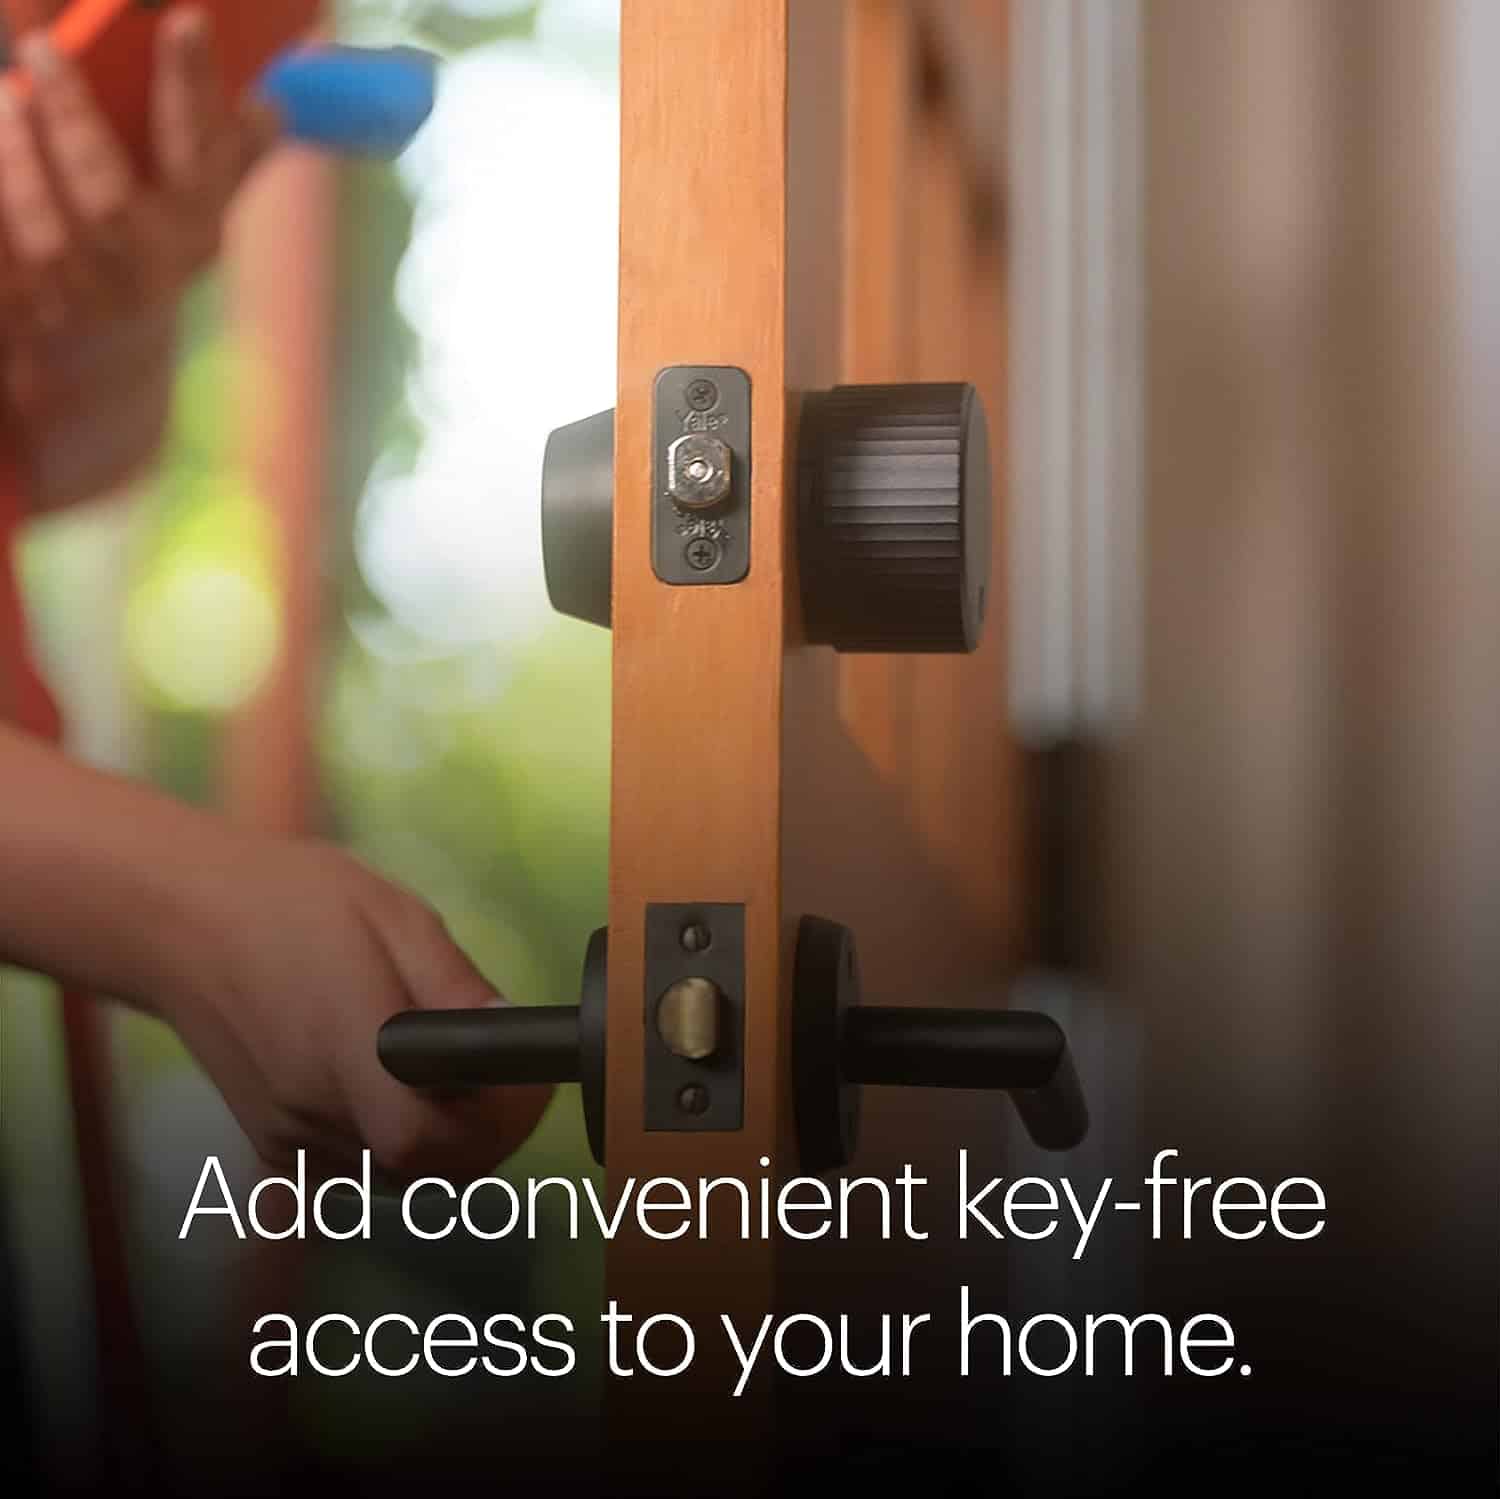 August Home, Wi-Fi Smart Lock (4th Generation) Review: Upgrade Your Deadbolt with Convenience and Security